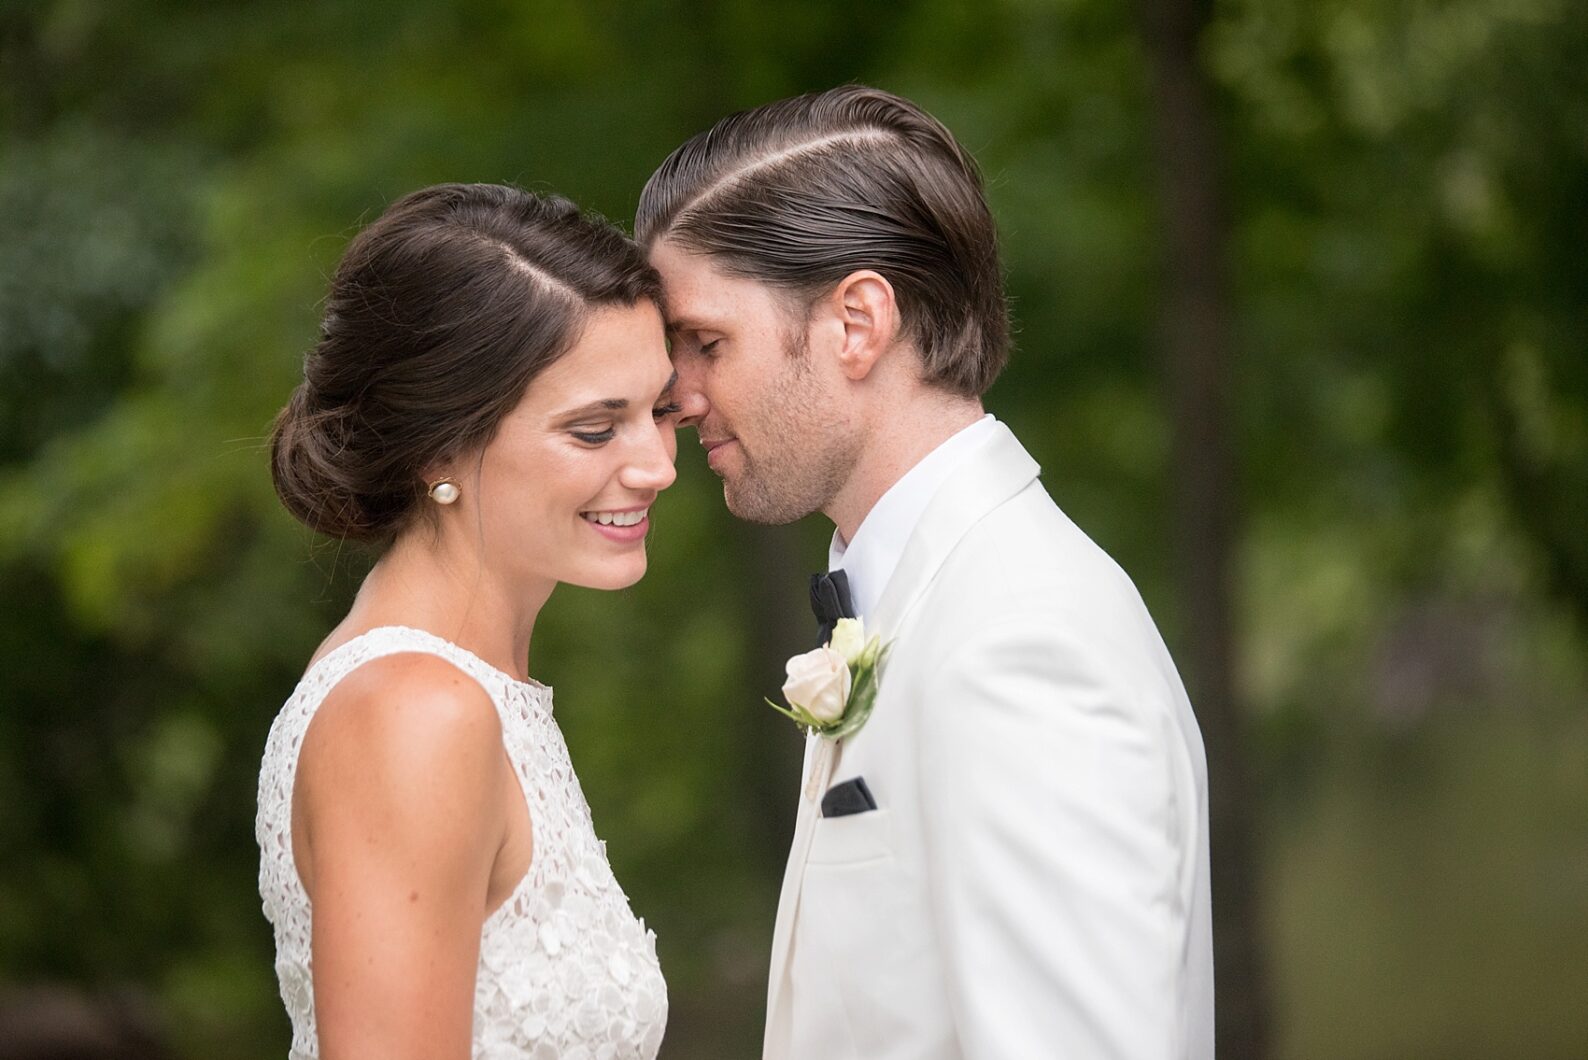 Bride and groom at The Riverview, Connecticut. Images by NYC wedding photographer Mikkel Paige Photography.